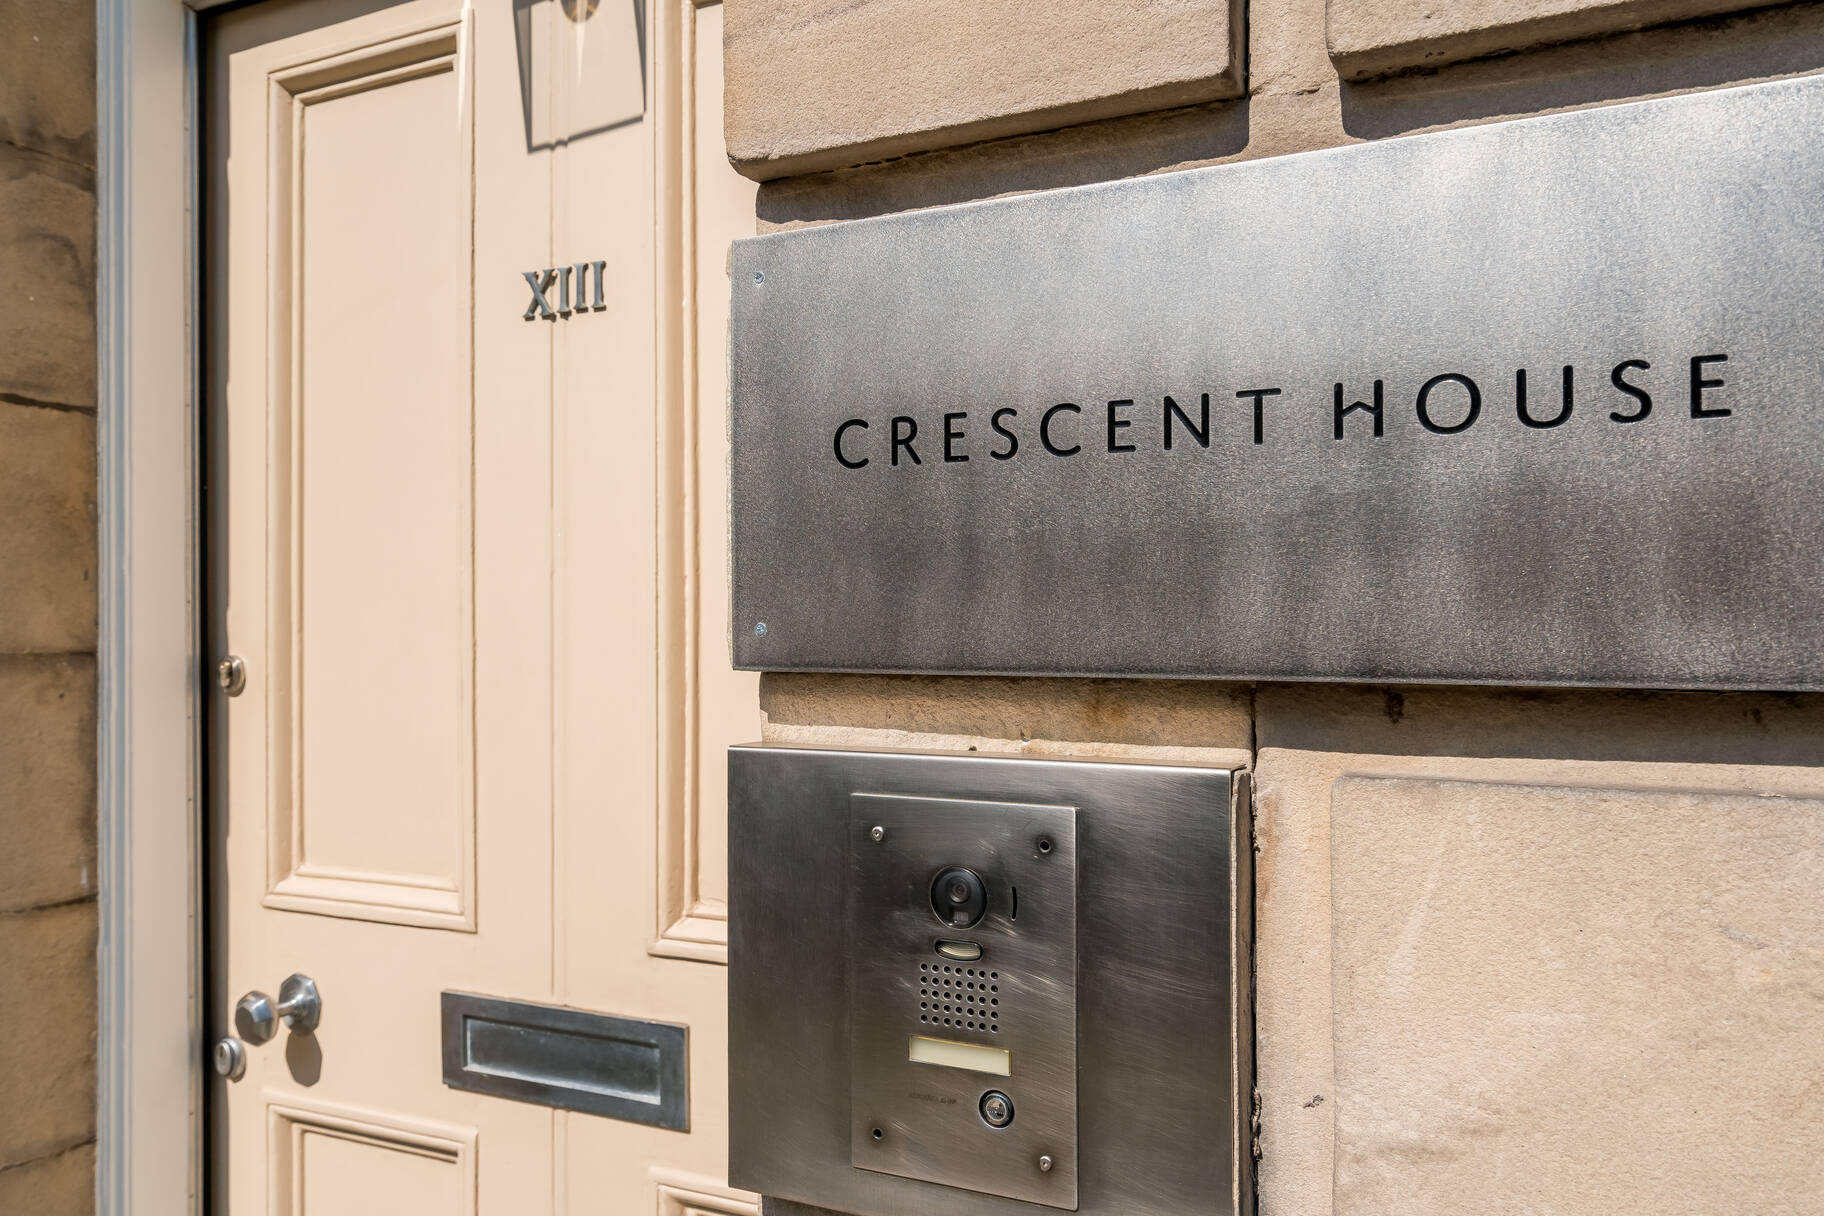 Welcome to Crescent House - just buzz and you are in